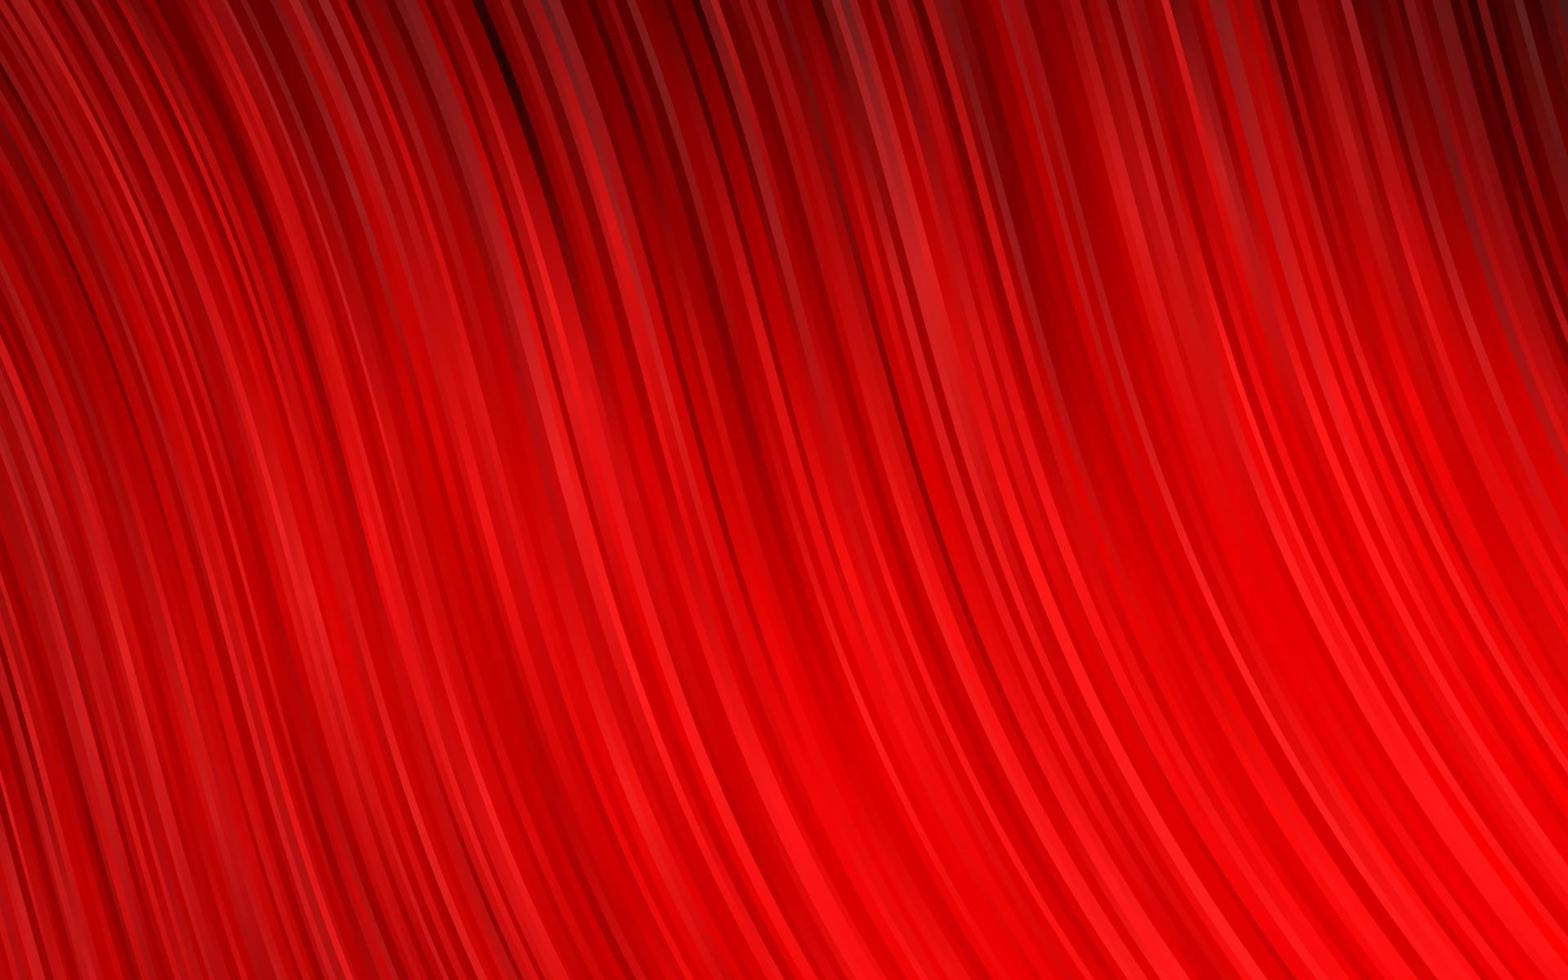 Light Red vector background with lava shapes.